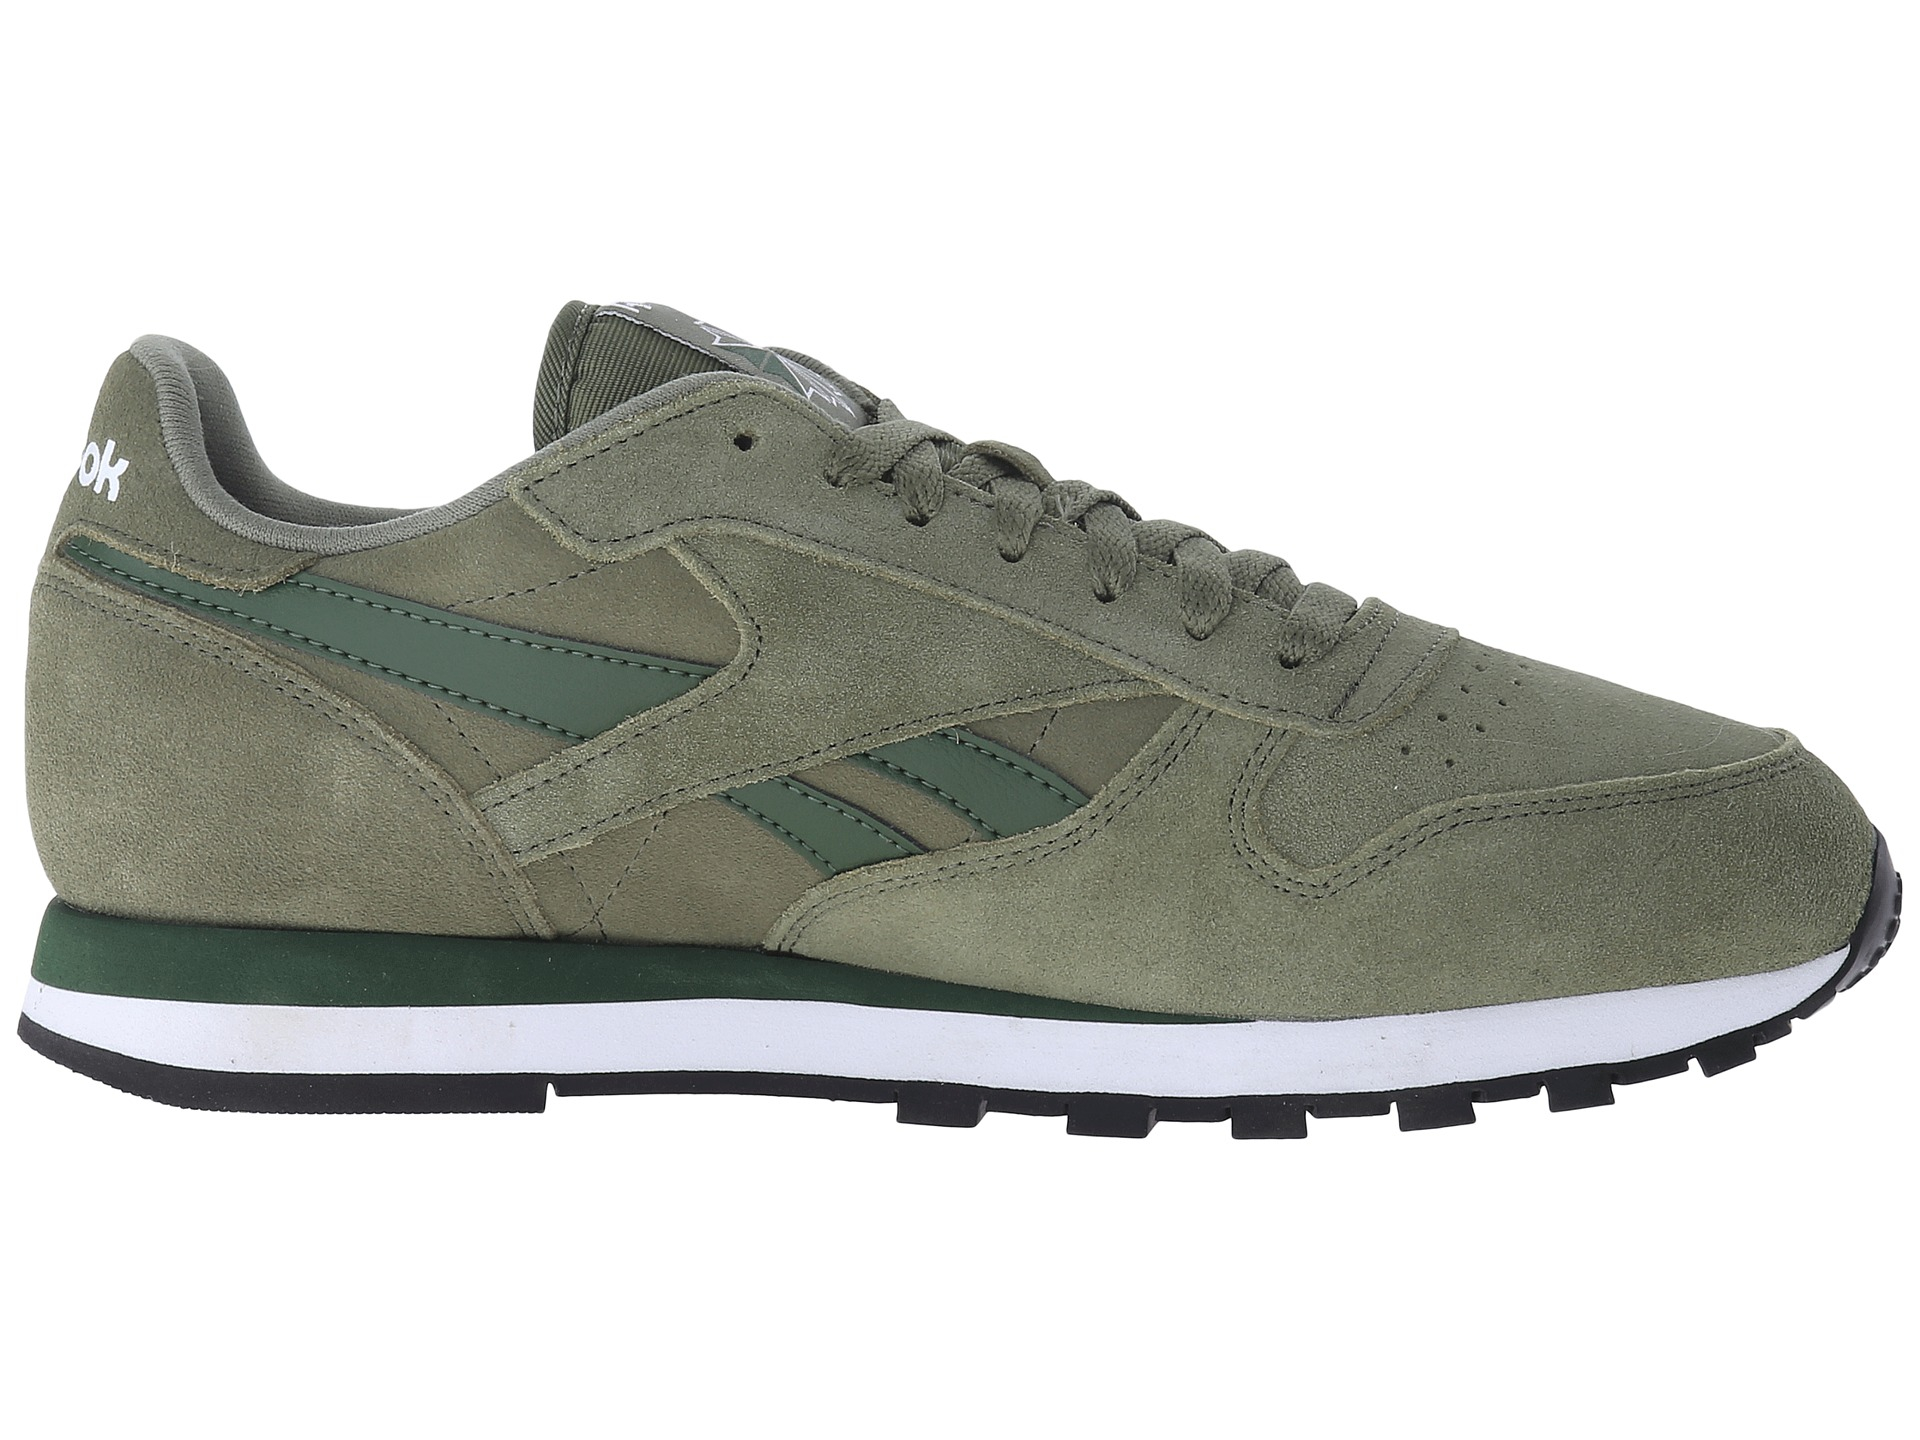 Reebok Classic Leather Suede in Gray for Men - Lyst